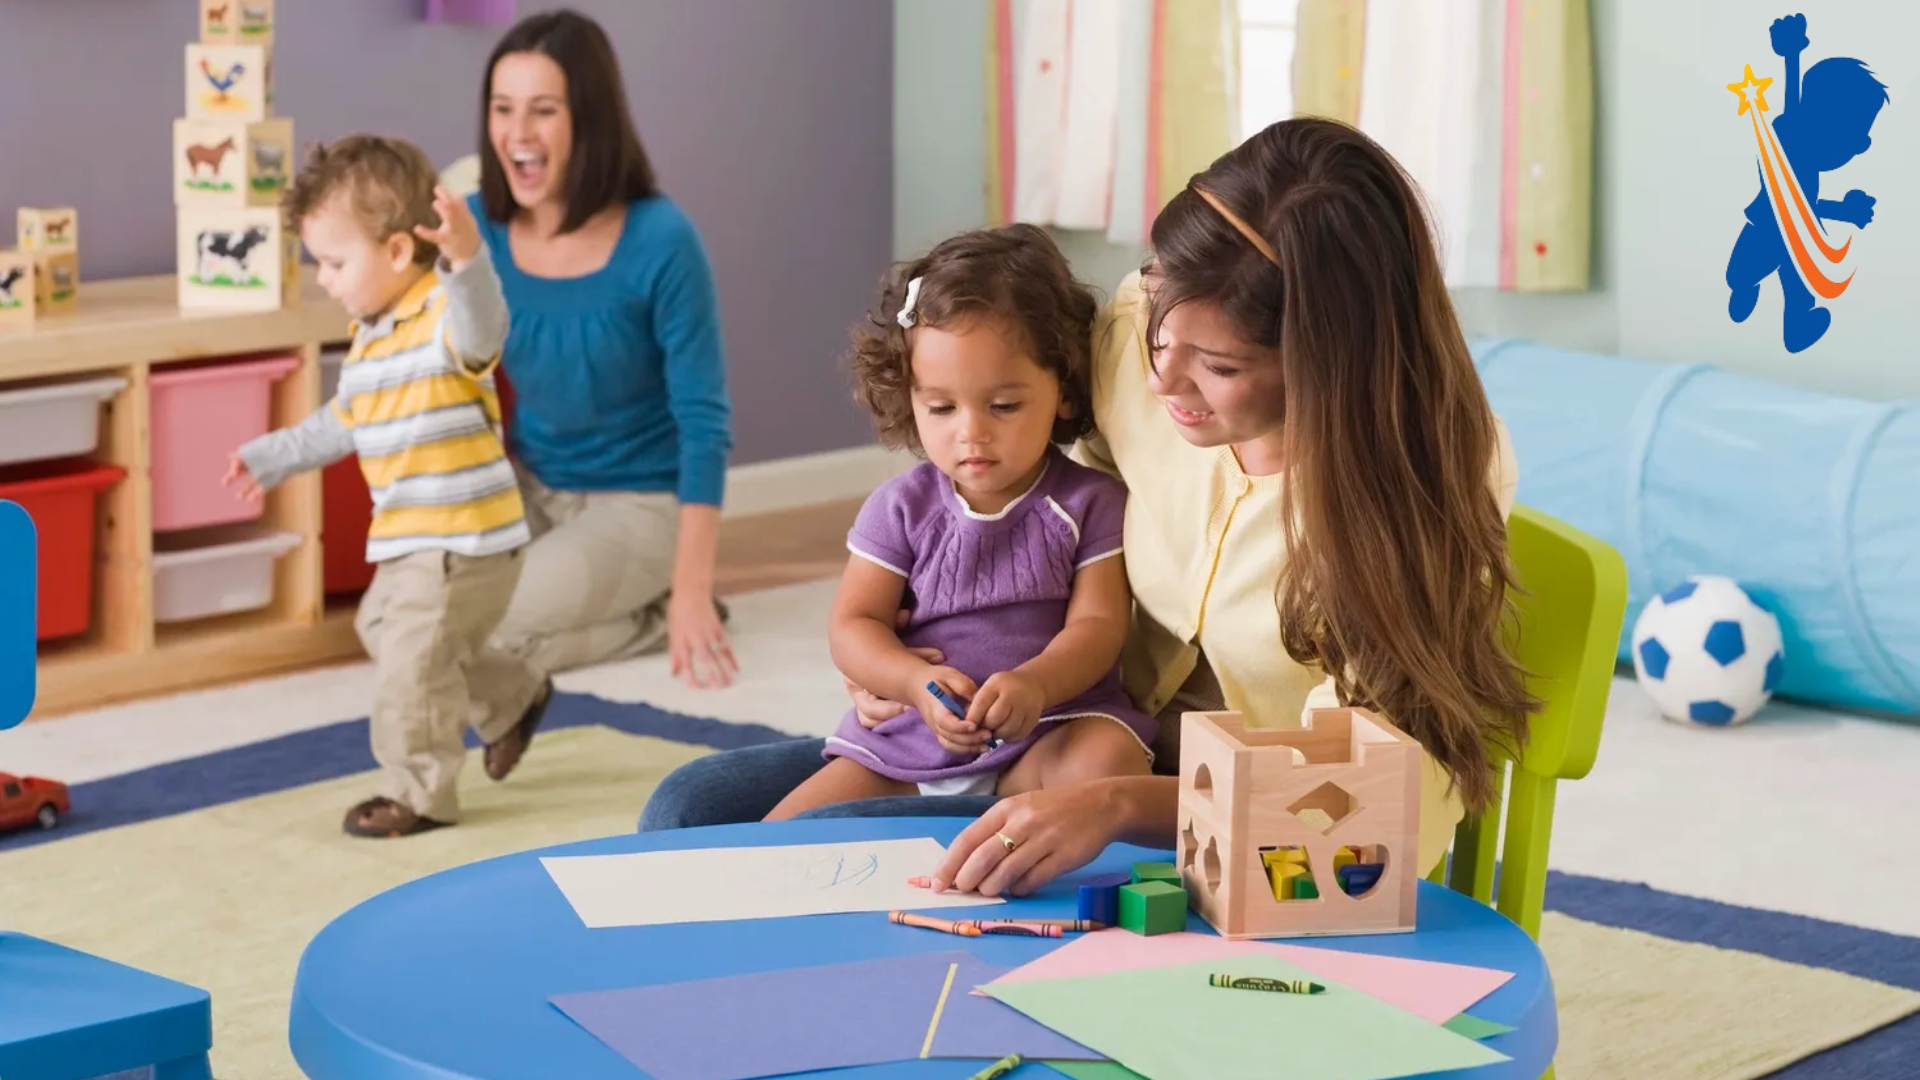 Providing Quality Childcare Services in Edmonton: A Guide to Great Start Academy